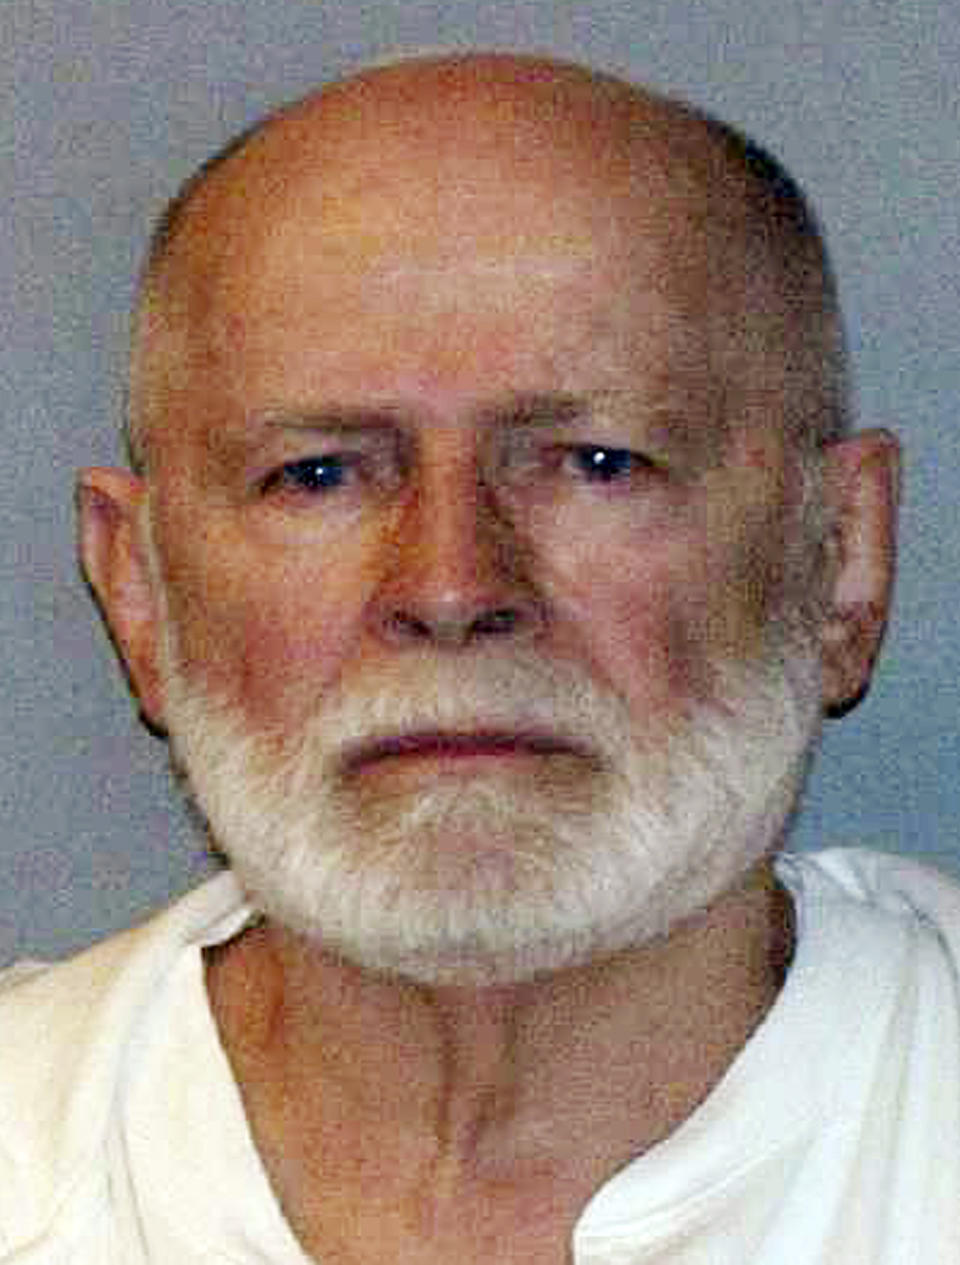 FILE - This file June 23, 2011 booking photo provided by the U.S. Marshals Service shows James "Whitey" Bulger, captured in Santa Monica, Calif., after 16 years on the run. Bulger is serving two life sentences after being convicted in 2013 of playing a role in 11 murders and a string of other crimes in the 1970s and ‘80s. Fred Weichel of Boston, who has spent more than 30 years in prison for a killing he said he didn't commit, has an ally in Bulger. In handwritten letters sent from jail in fall 2013, Bulger wrote that the real killer was an unnamed friend of Weichel. (AP Photo/U.S. Marshals Service, File)